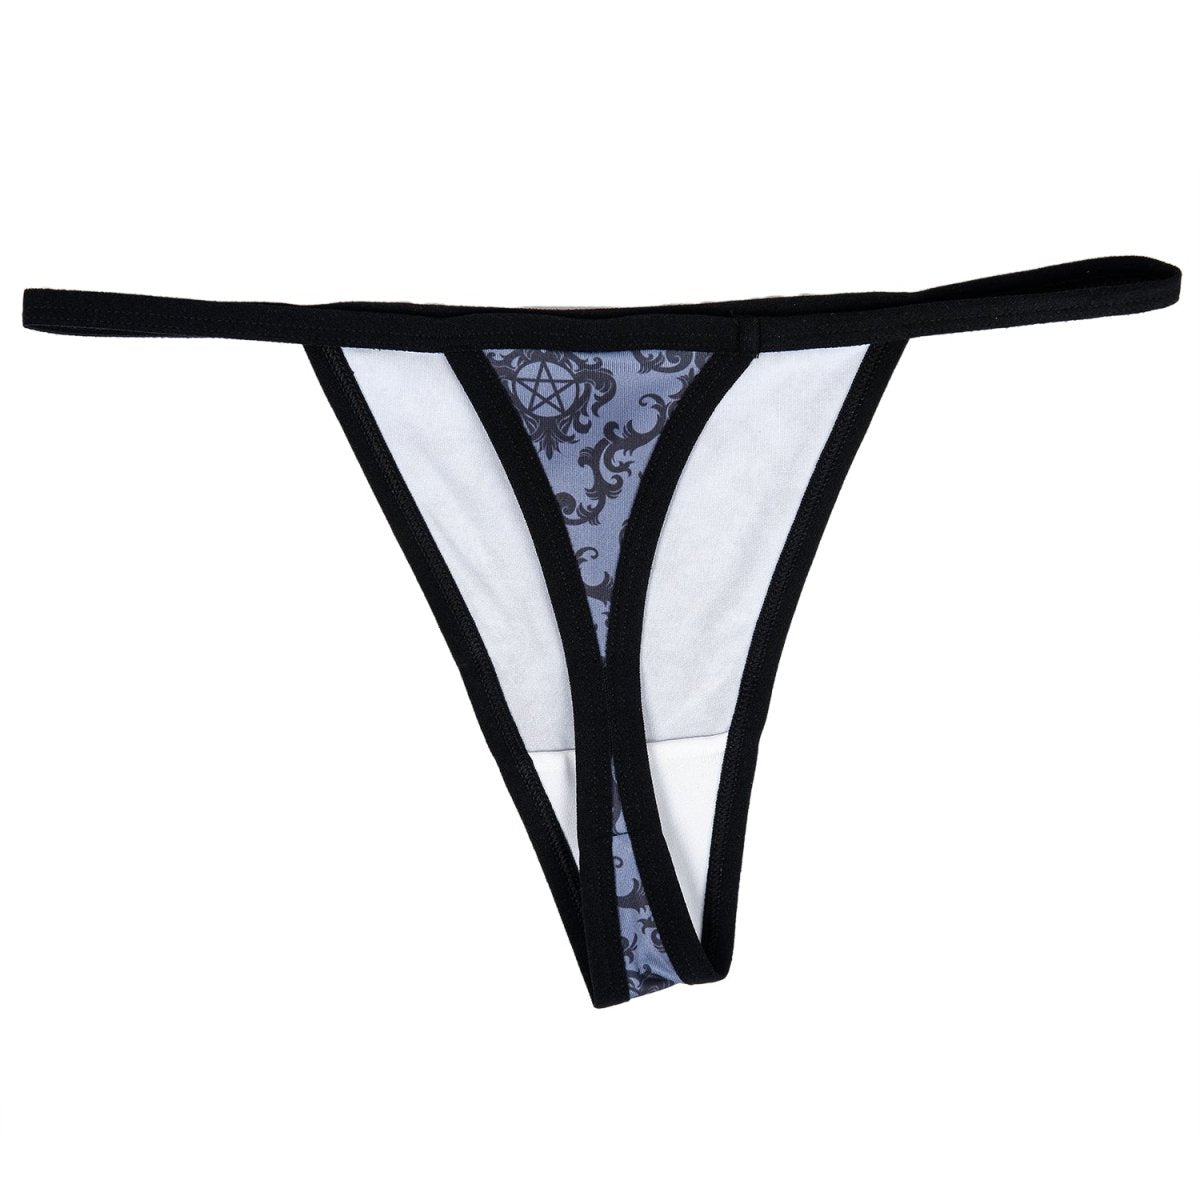 Victorian Damask Print Thong and Bra Set – Too Fast